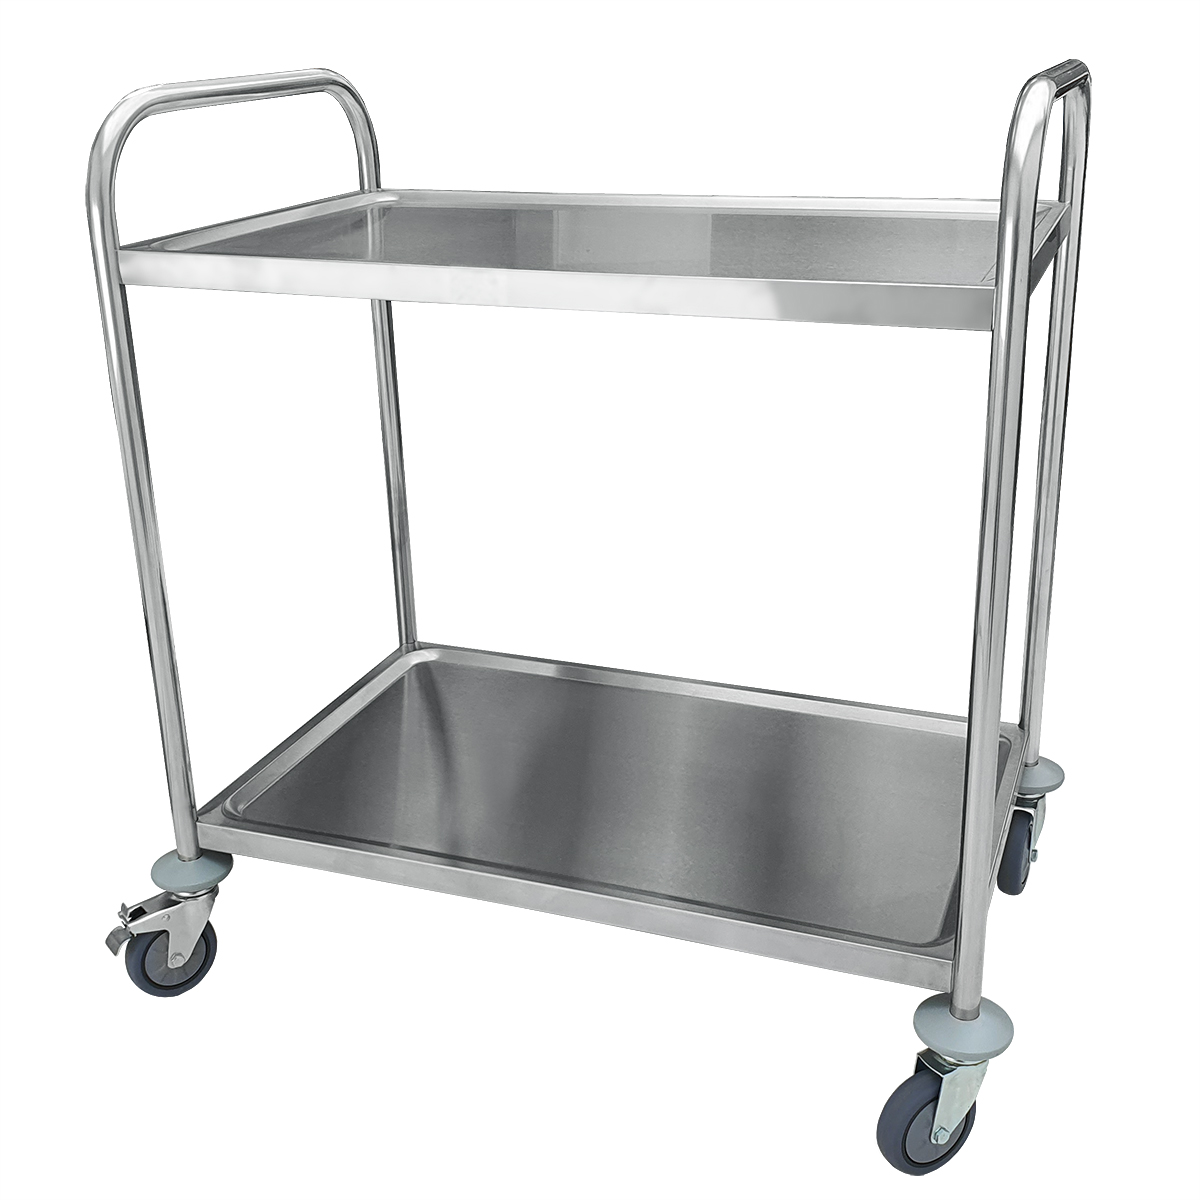 Cater-Cook CK8861 2 Tier Stainless Steel Service Trolley